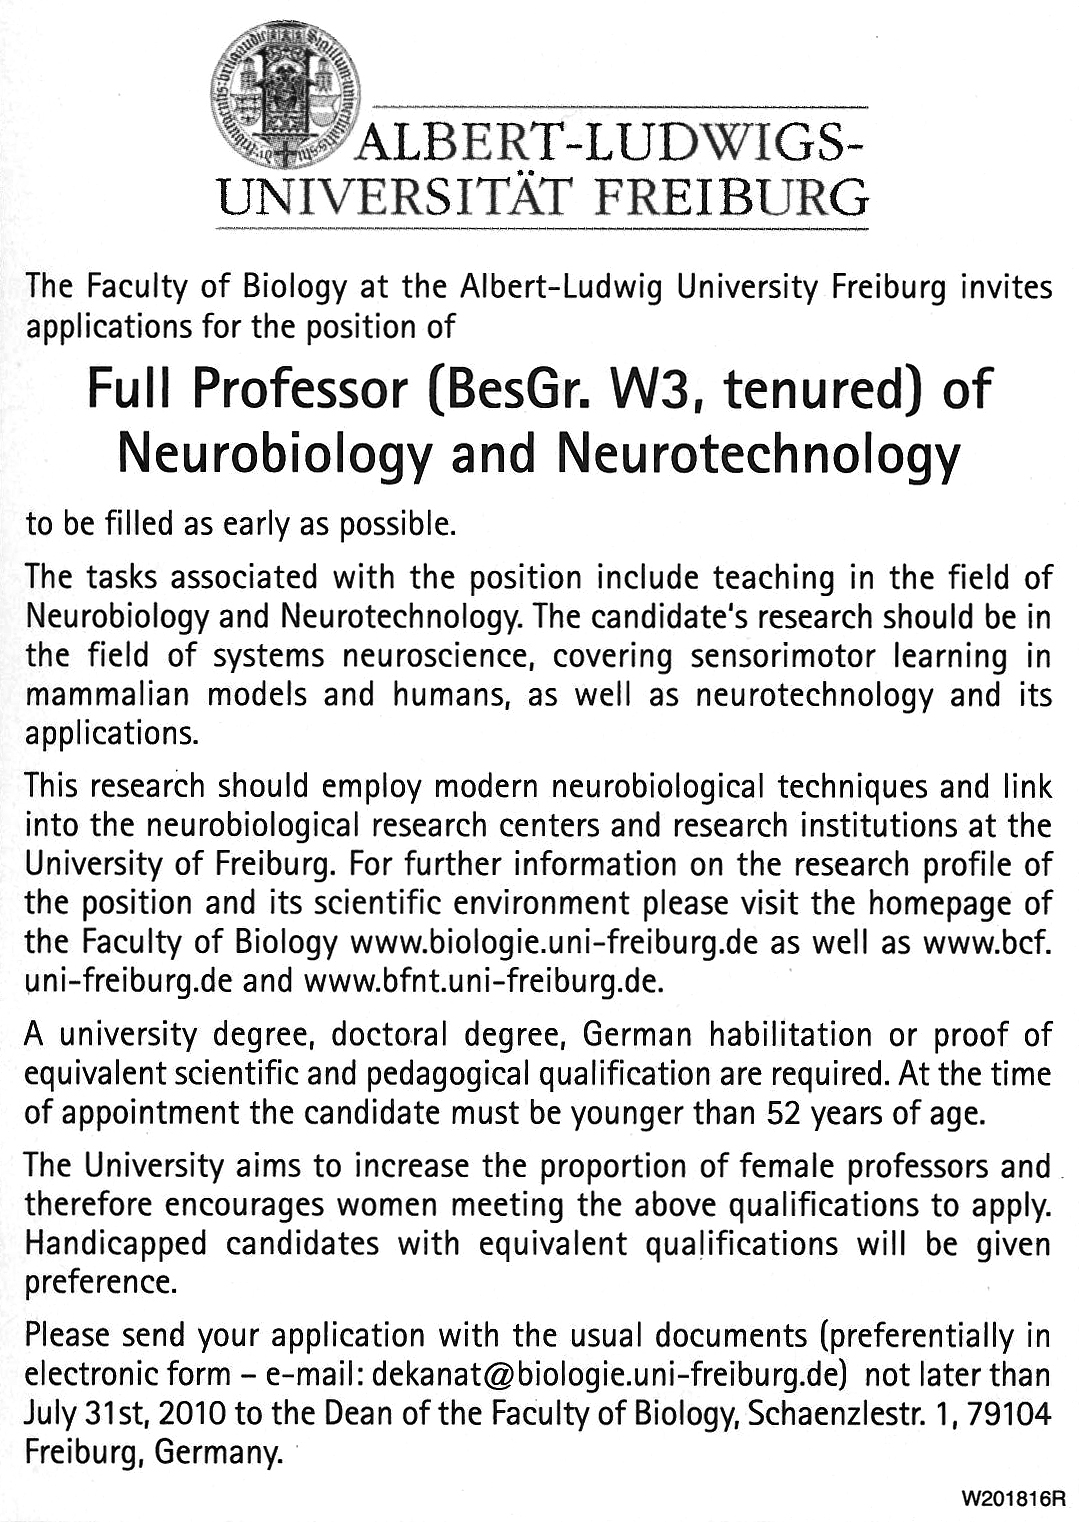 Position of Professor of Neurobiology and Neurotechnology